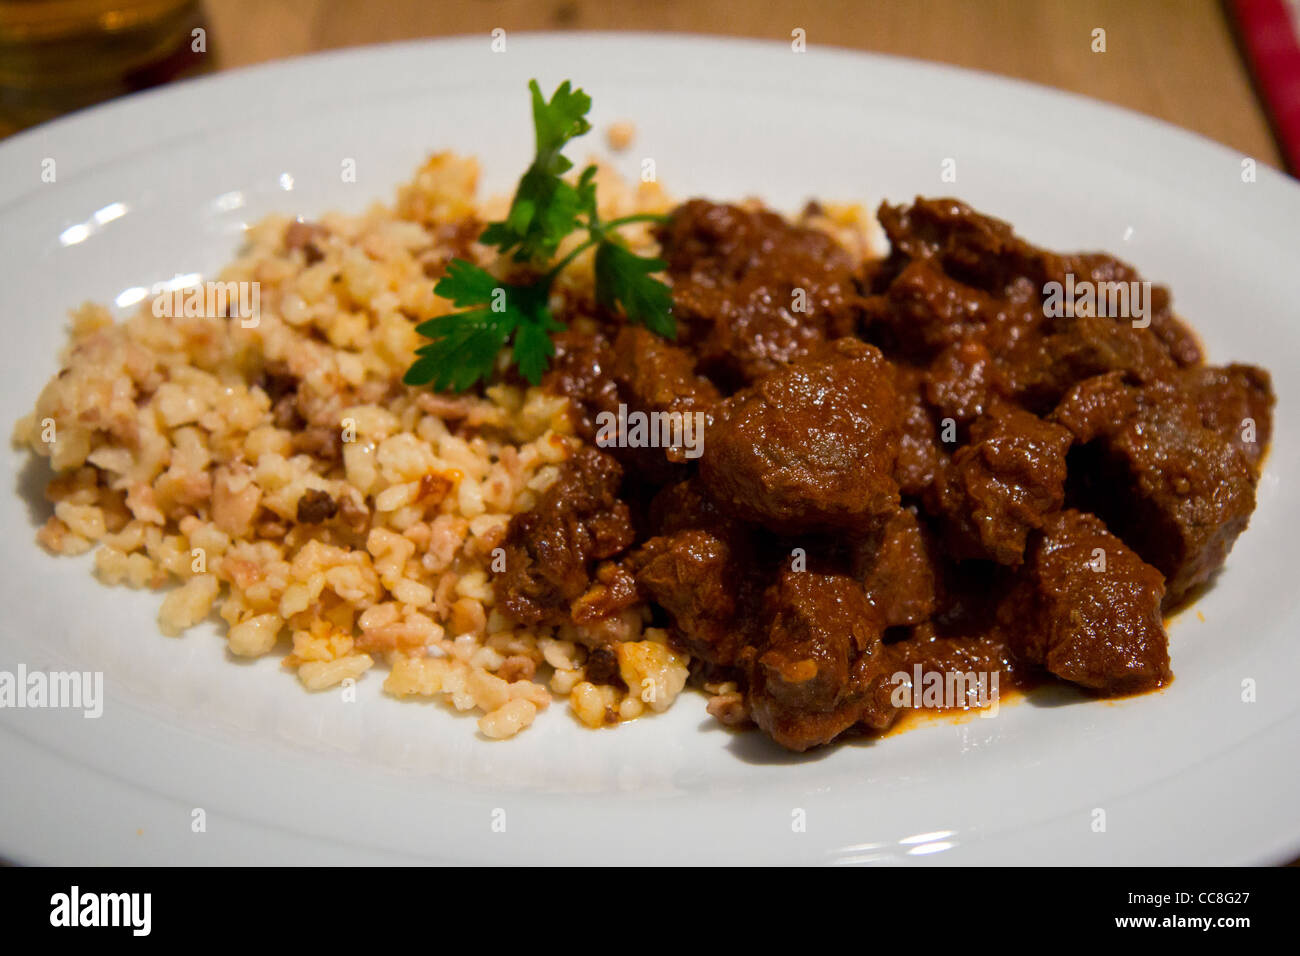 A plate of Hungarian Goulash Stock Photo